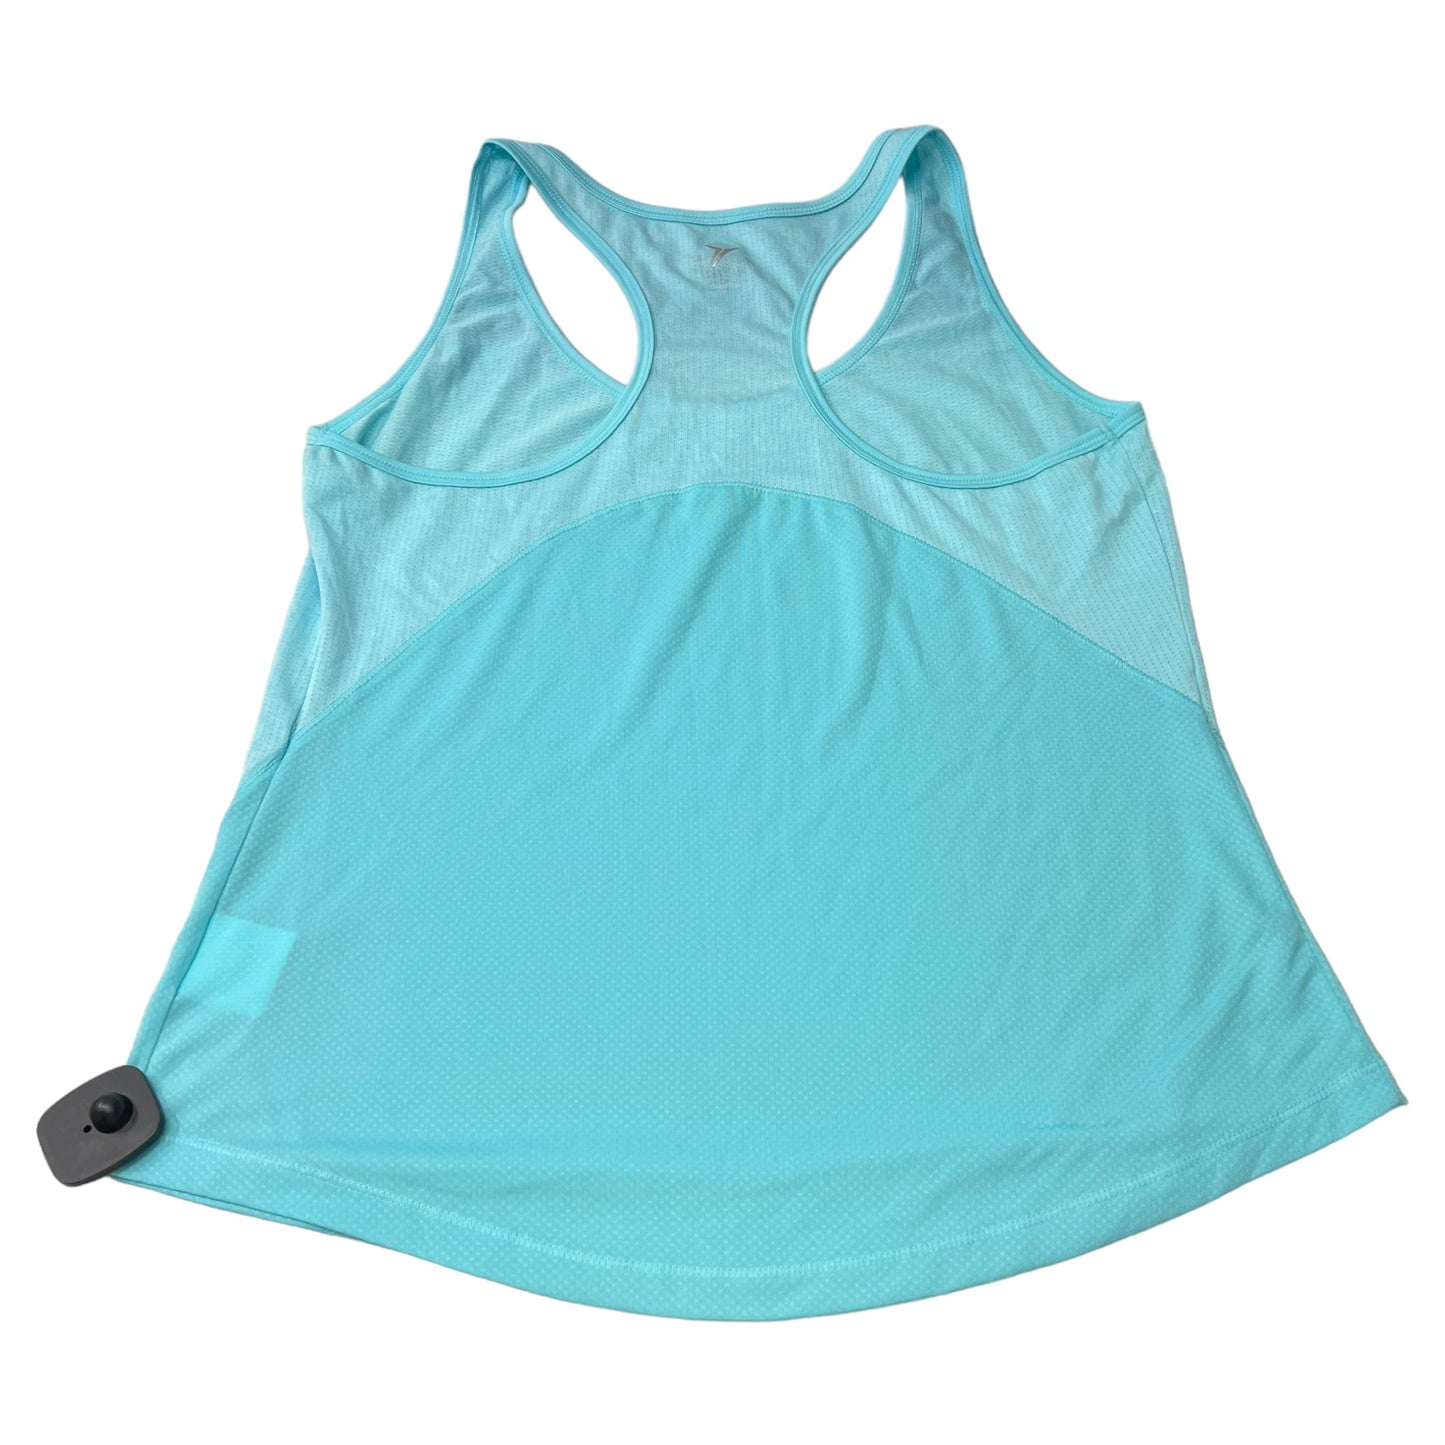 Athletic Tank Top By Old Navy  Size: L